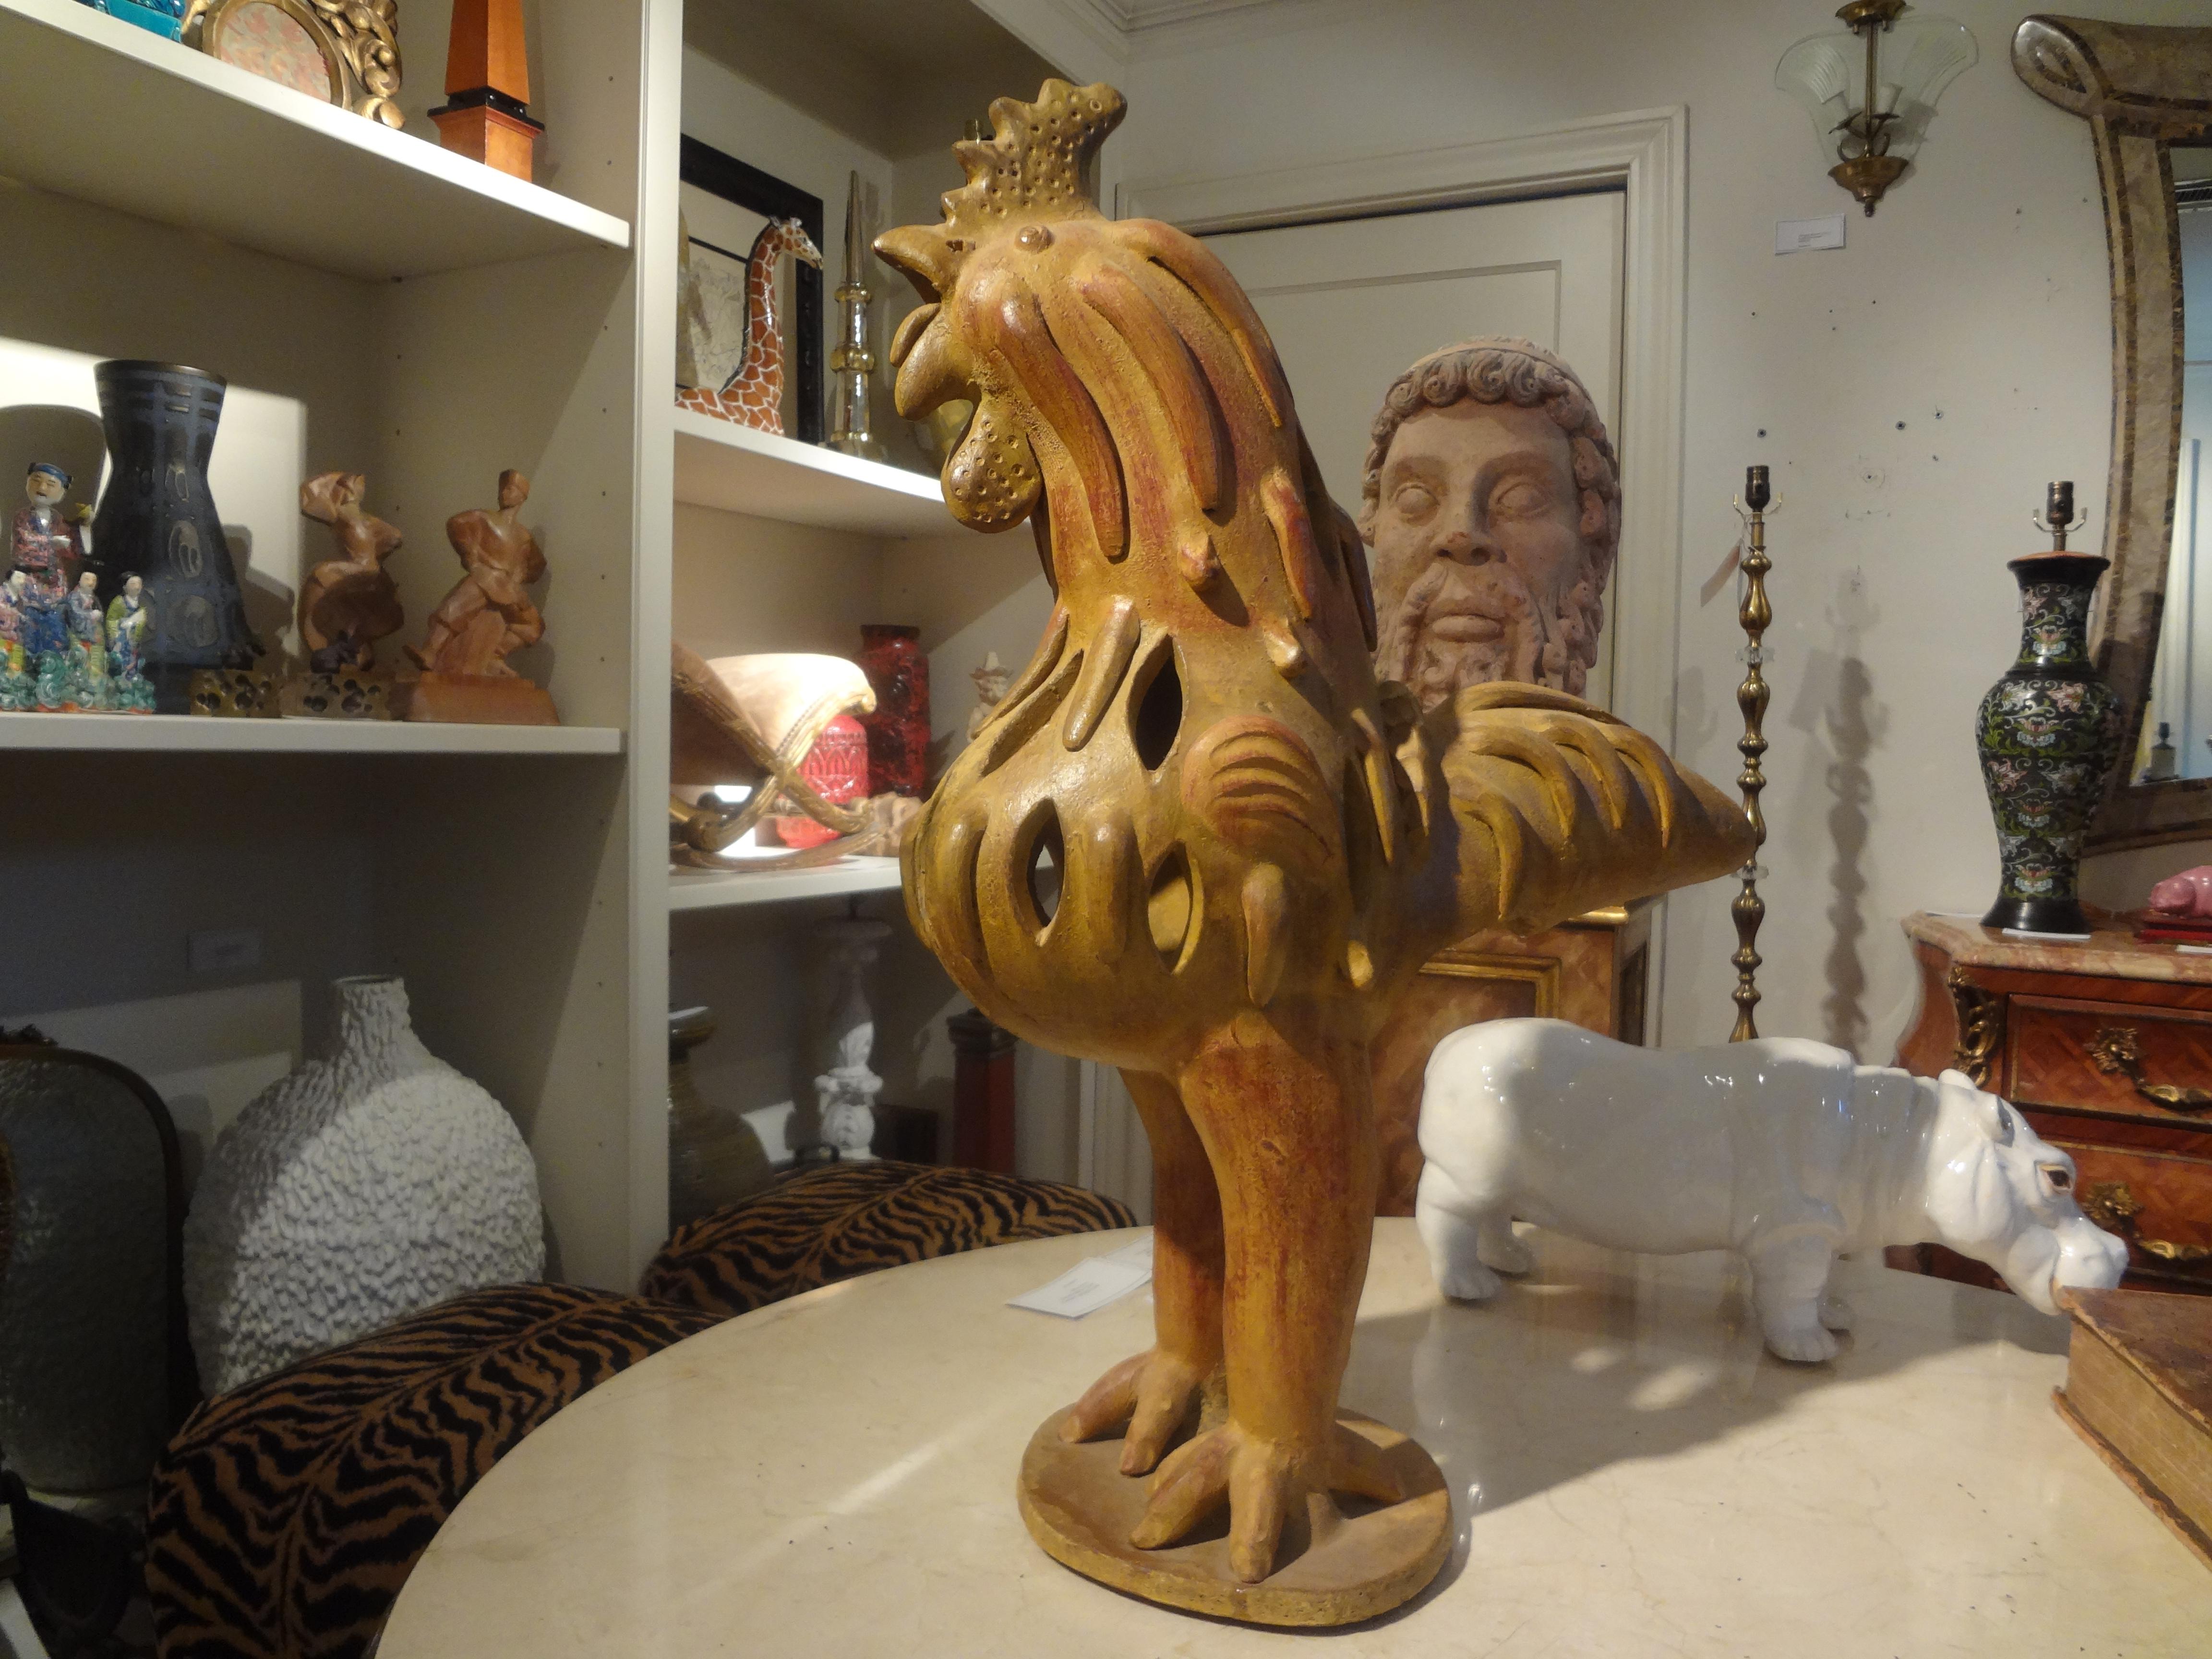 Italian Modernist terracotta rooster sculpture. This stunning vintage Italian midcentury terra cotta rooster is large and well executed.